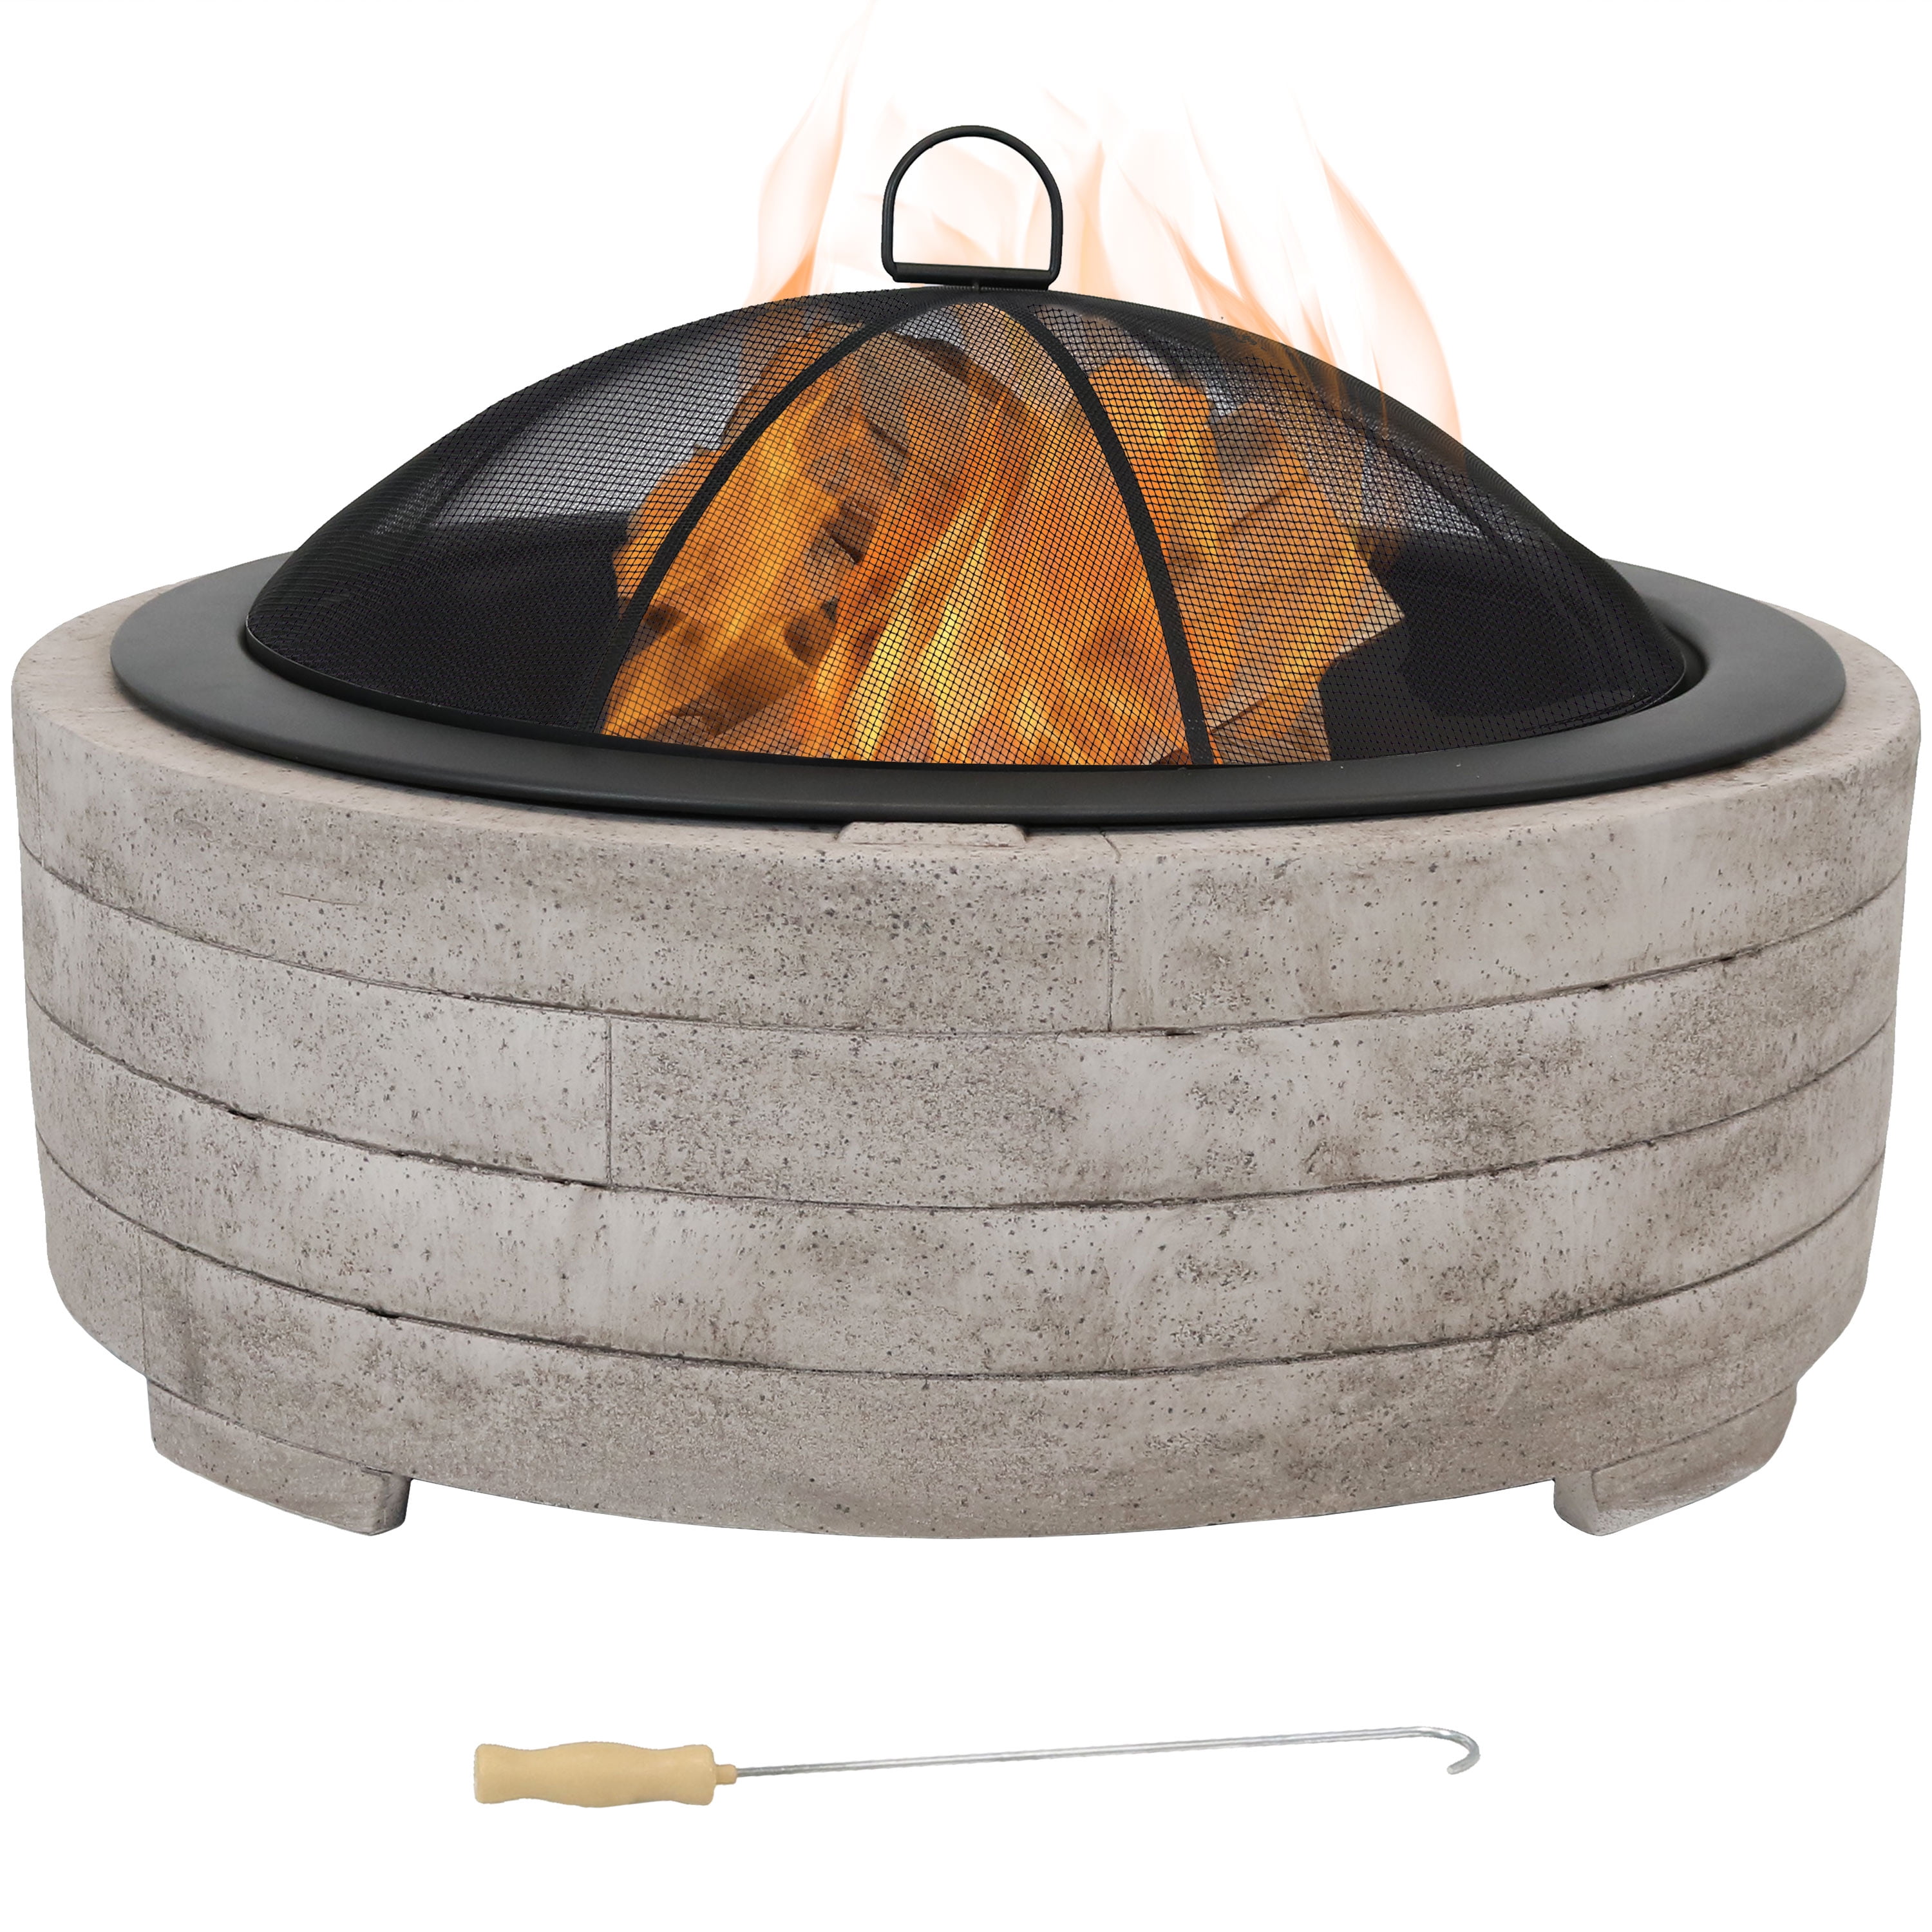 Peaktop Concrete Round Charcoal and Wood Burning Fire Pit for Outdoor Patio Garden Backyard with Spark Screen 27 inch Length Grate Natural Stone and BBQ Grill Fireplace Poker 